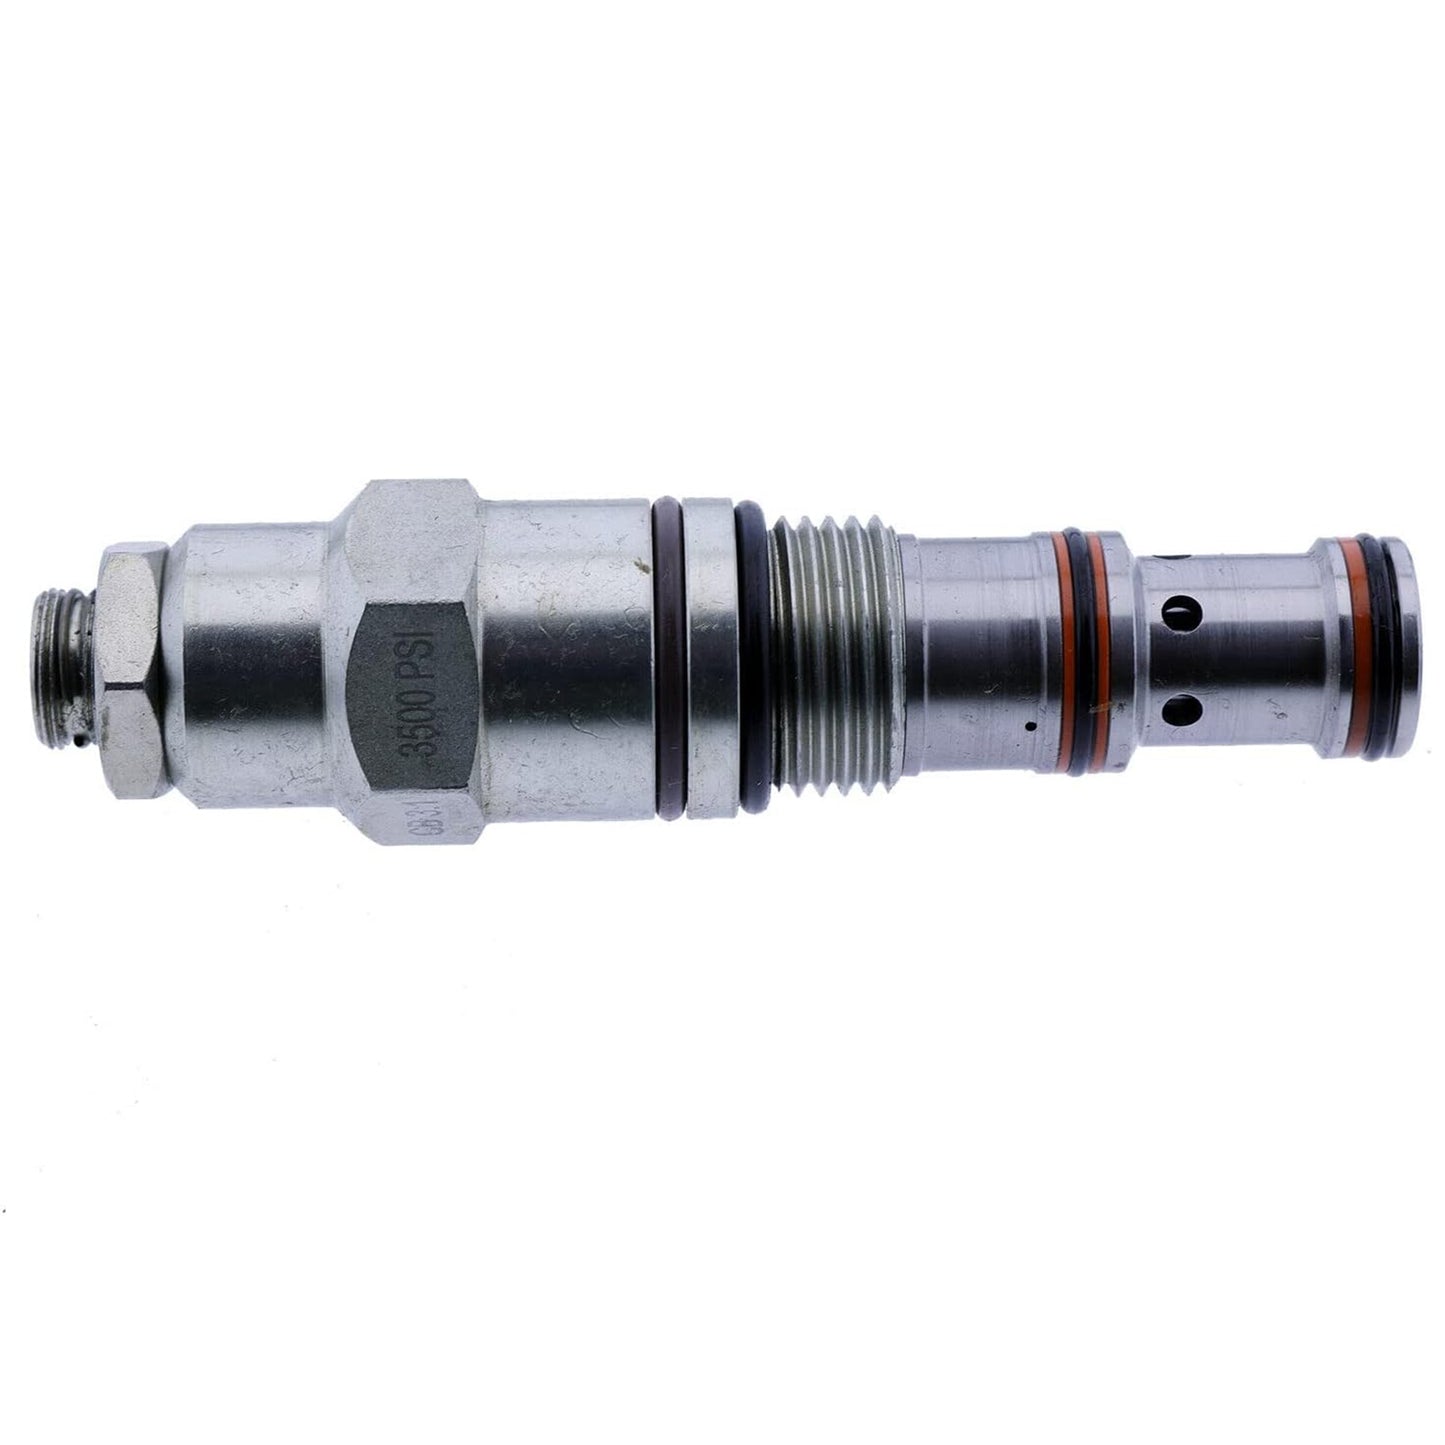 62256 Hydraulic Valve Hydraulic ValveCompatible with GENIE Boom Lift Models S-40 S-45 S-60